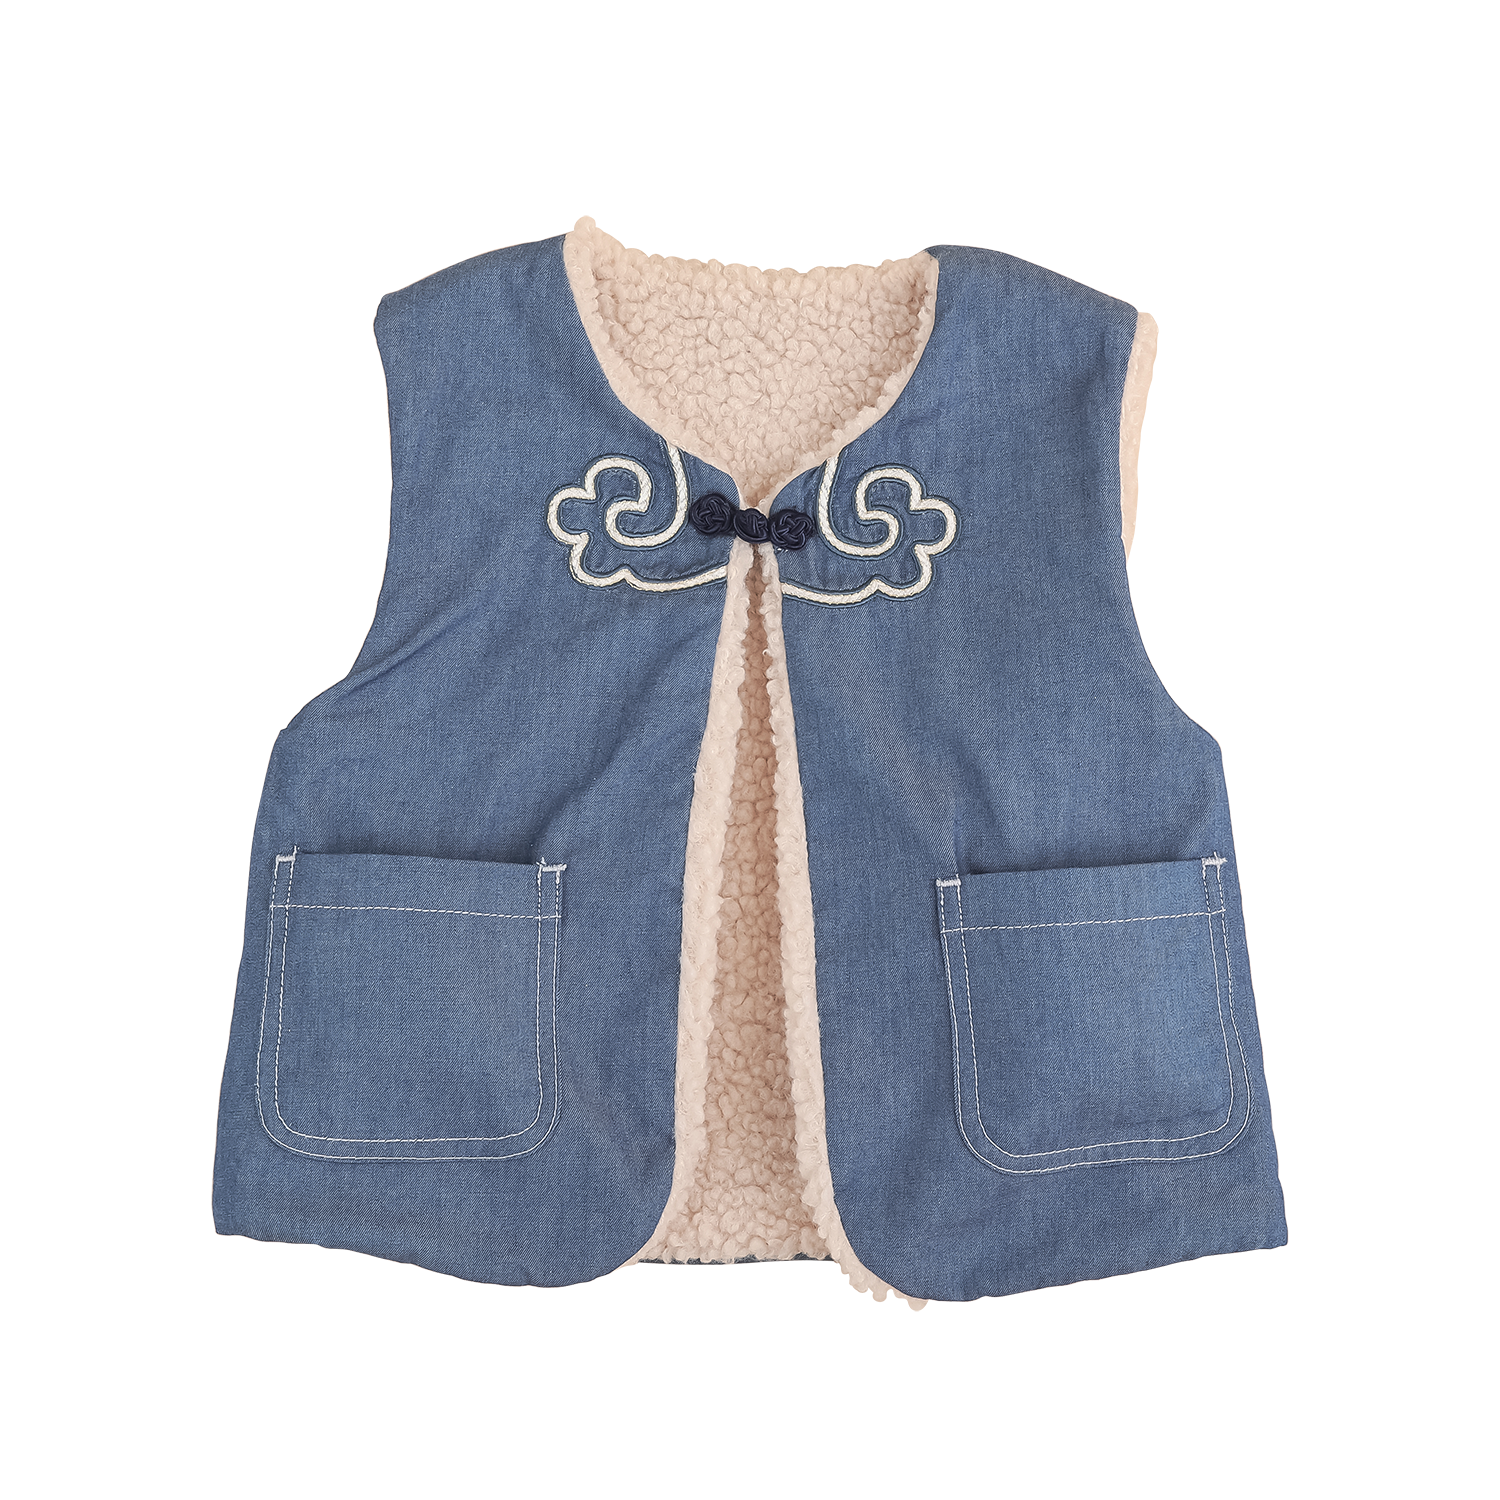 Denim and oatmeal reversible baby vest